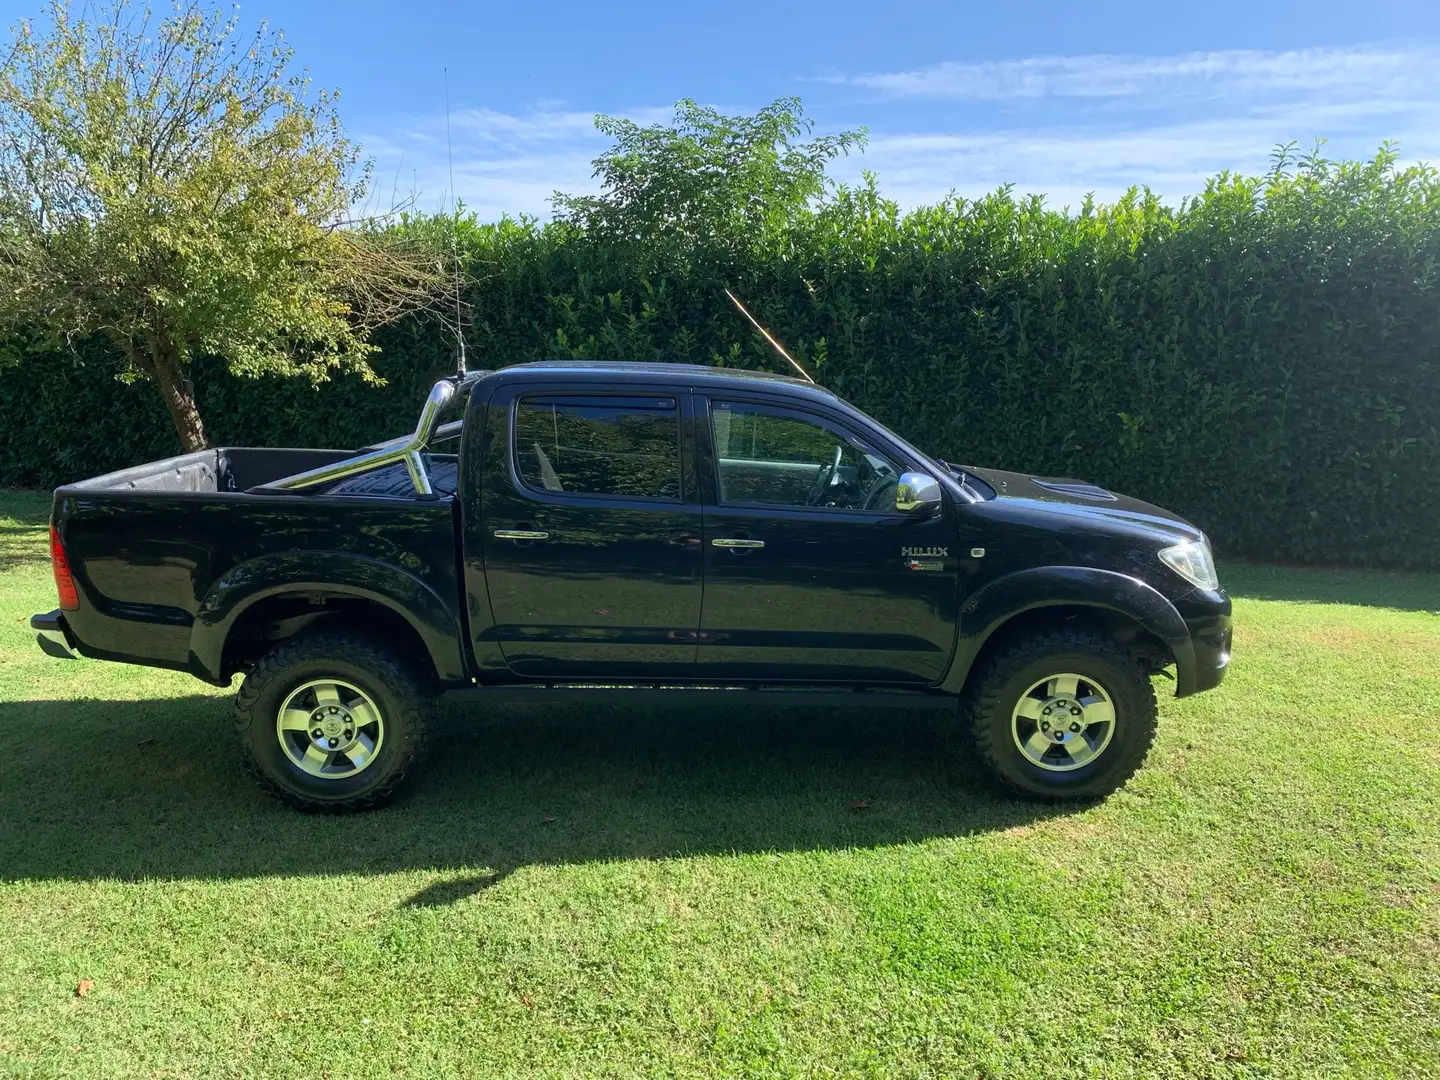 Toyota Hilux 3.0 double cab SR+ my11 crna - 1